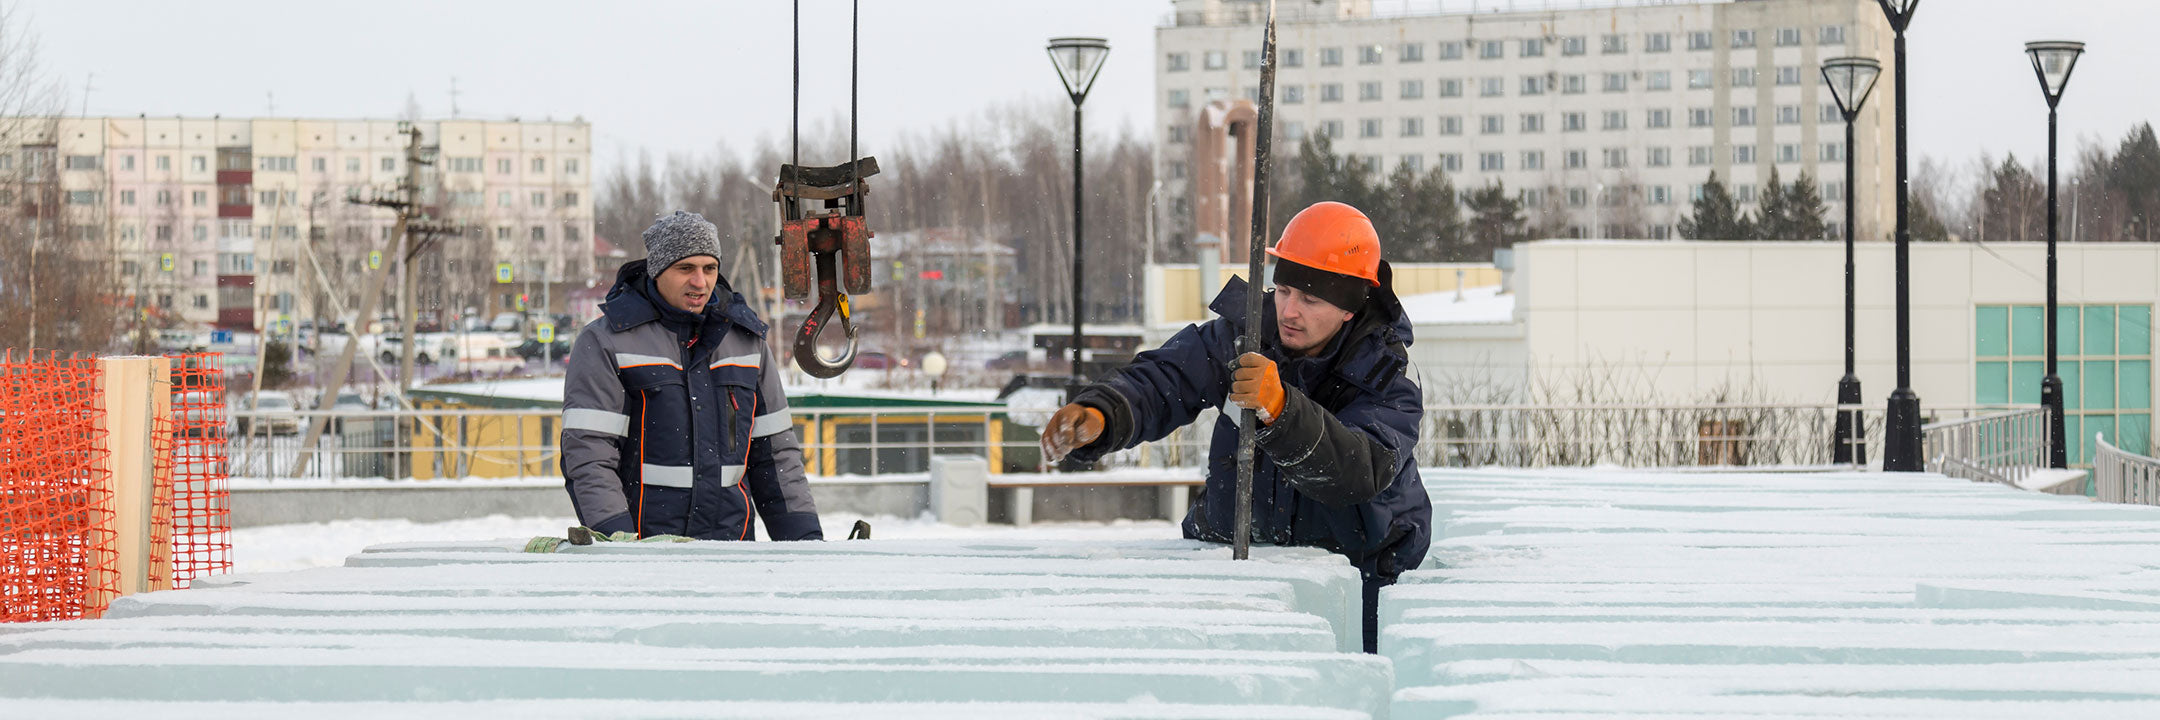 workers working for winter protection